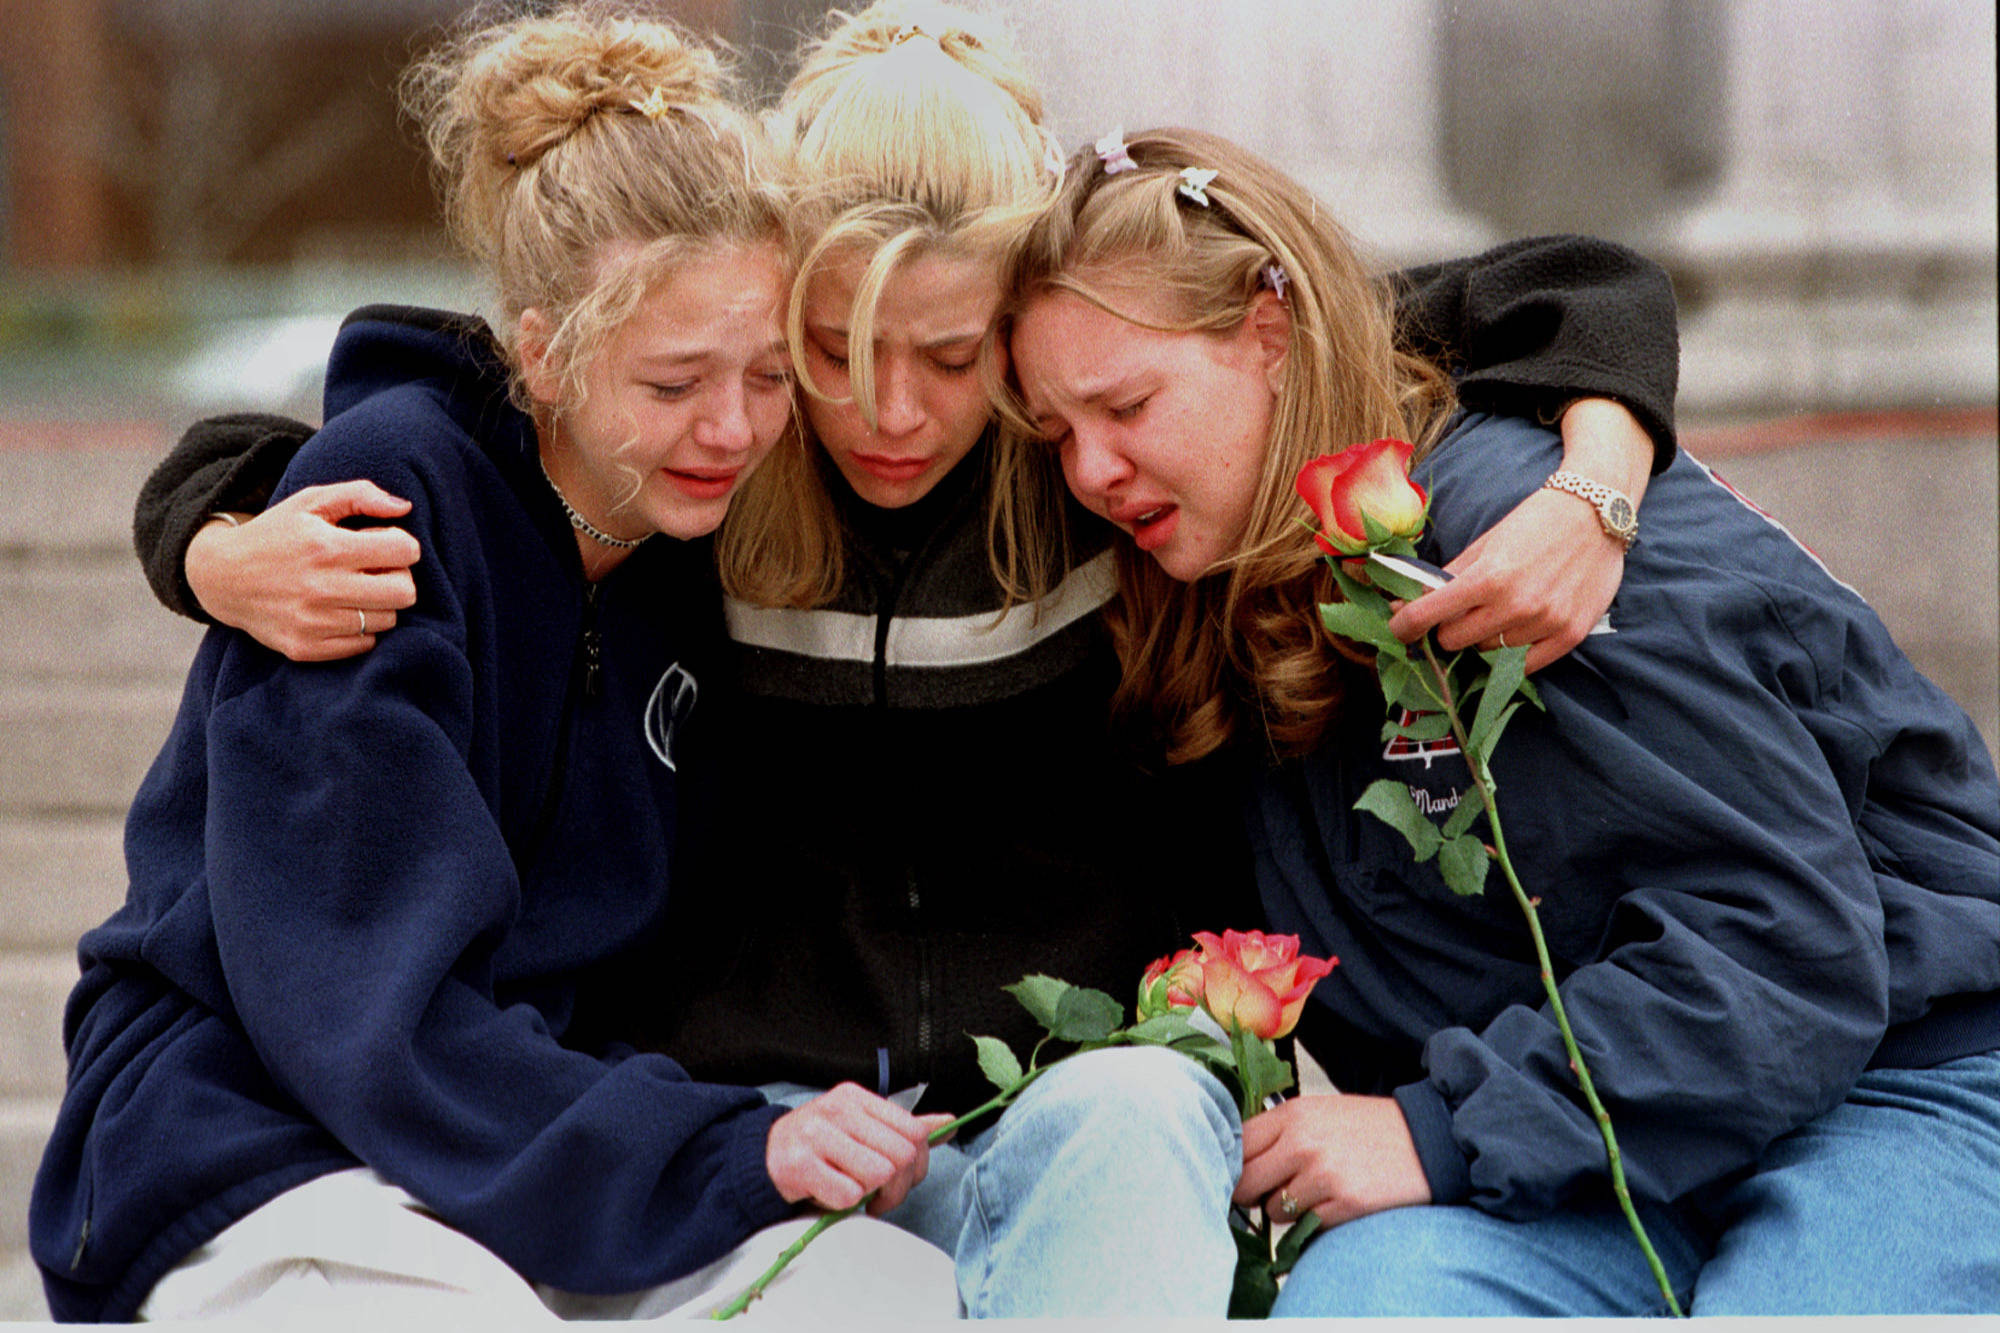 In this April 21, 1999 photo, from left, Rachel Ruth, Rhianna Cheek and Mandi Annibel, all 16-year-old sophomores at Heritage High School in Littleton, Colorado, console each other during a vigil service to honor the victims of the shooting spree in Columbine High School. Twelve students and one teacher were killed in a murderous rampage at the school on April 20, 1999 by two students who killed themselves in the aftermath. (Laura Rauch | The Associated Press File)